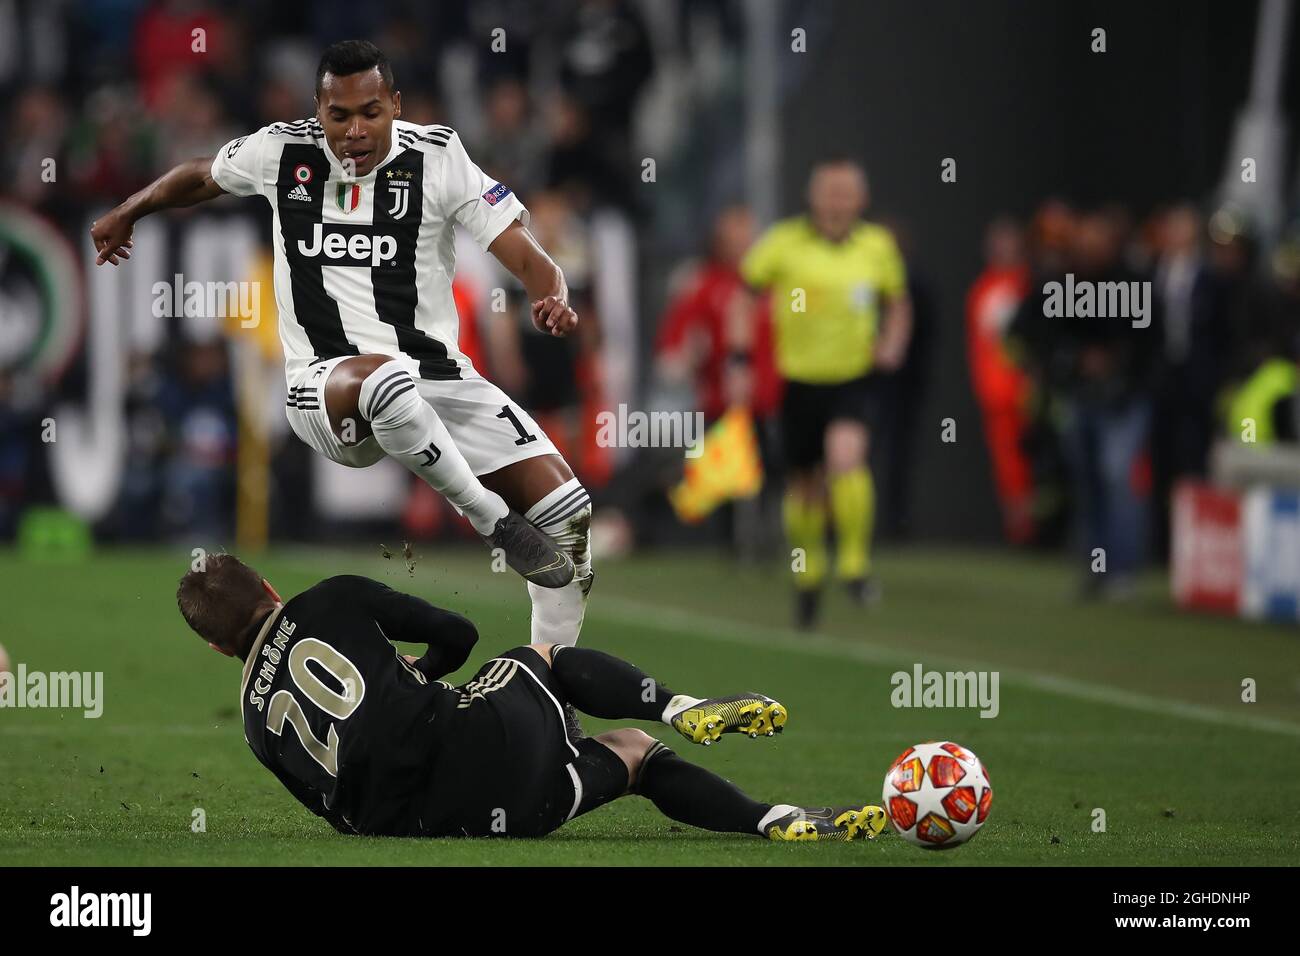 Lasse Schone of Ajax and Alex Sandro of Juventus during the UEFA Champions League match at Allianz Stadium, Turin. Picture date: 16th April 2019. Picture credit should read: Jonathan Moscrop/Sportimage via PA Images Stock Photo